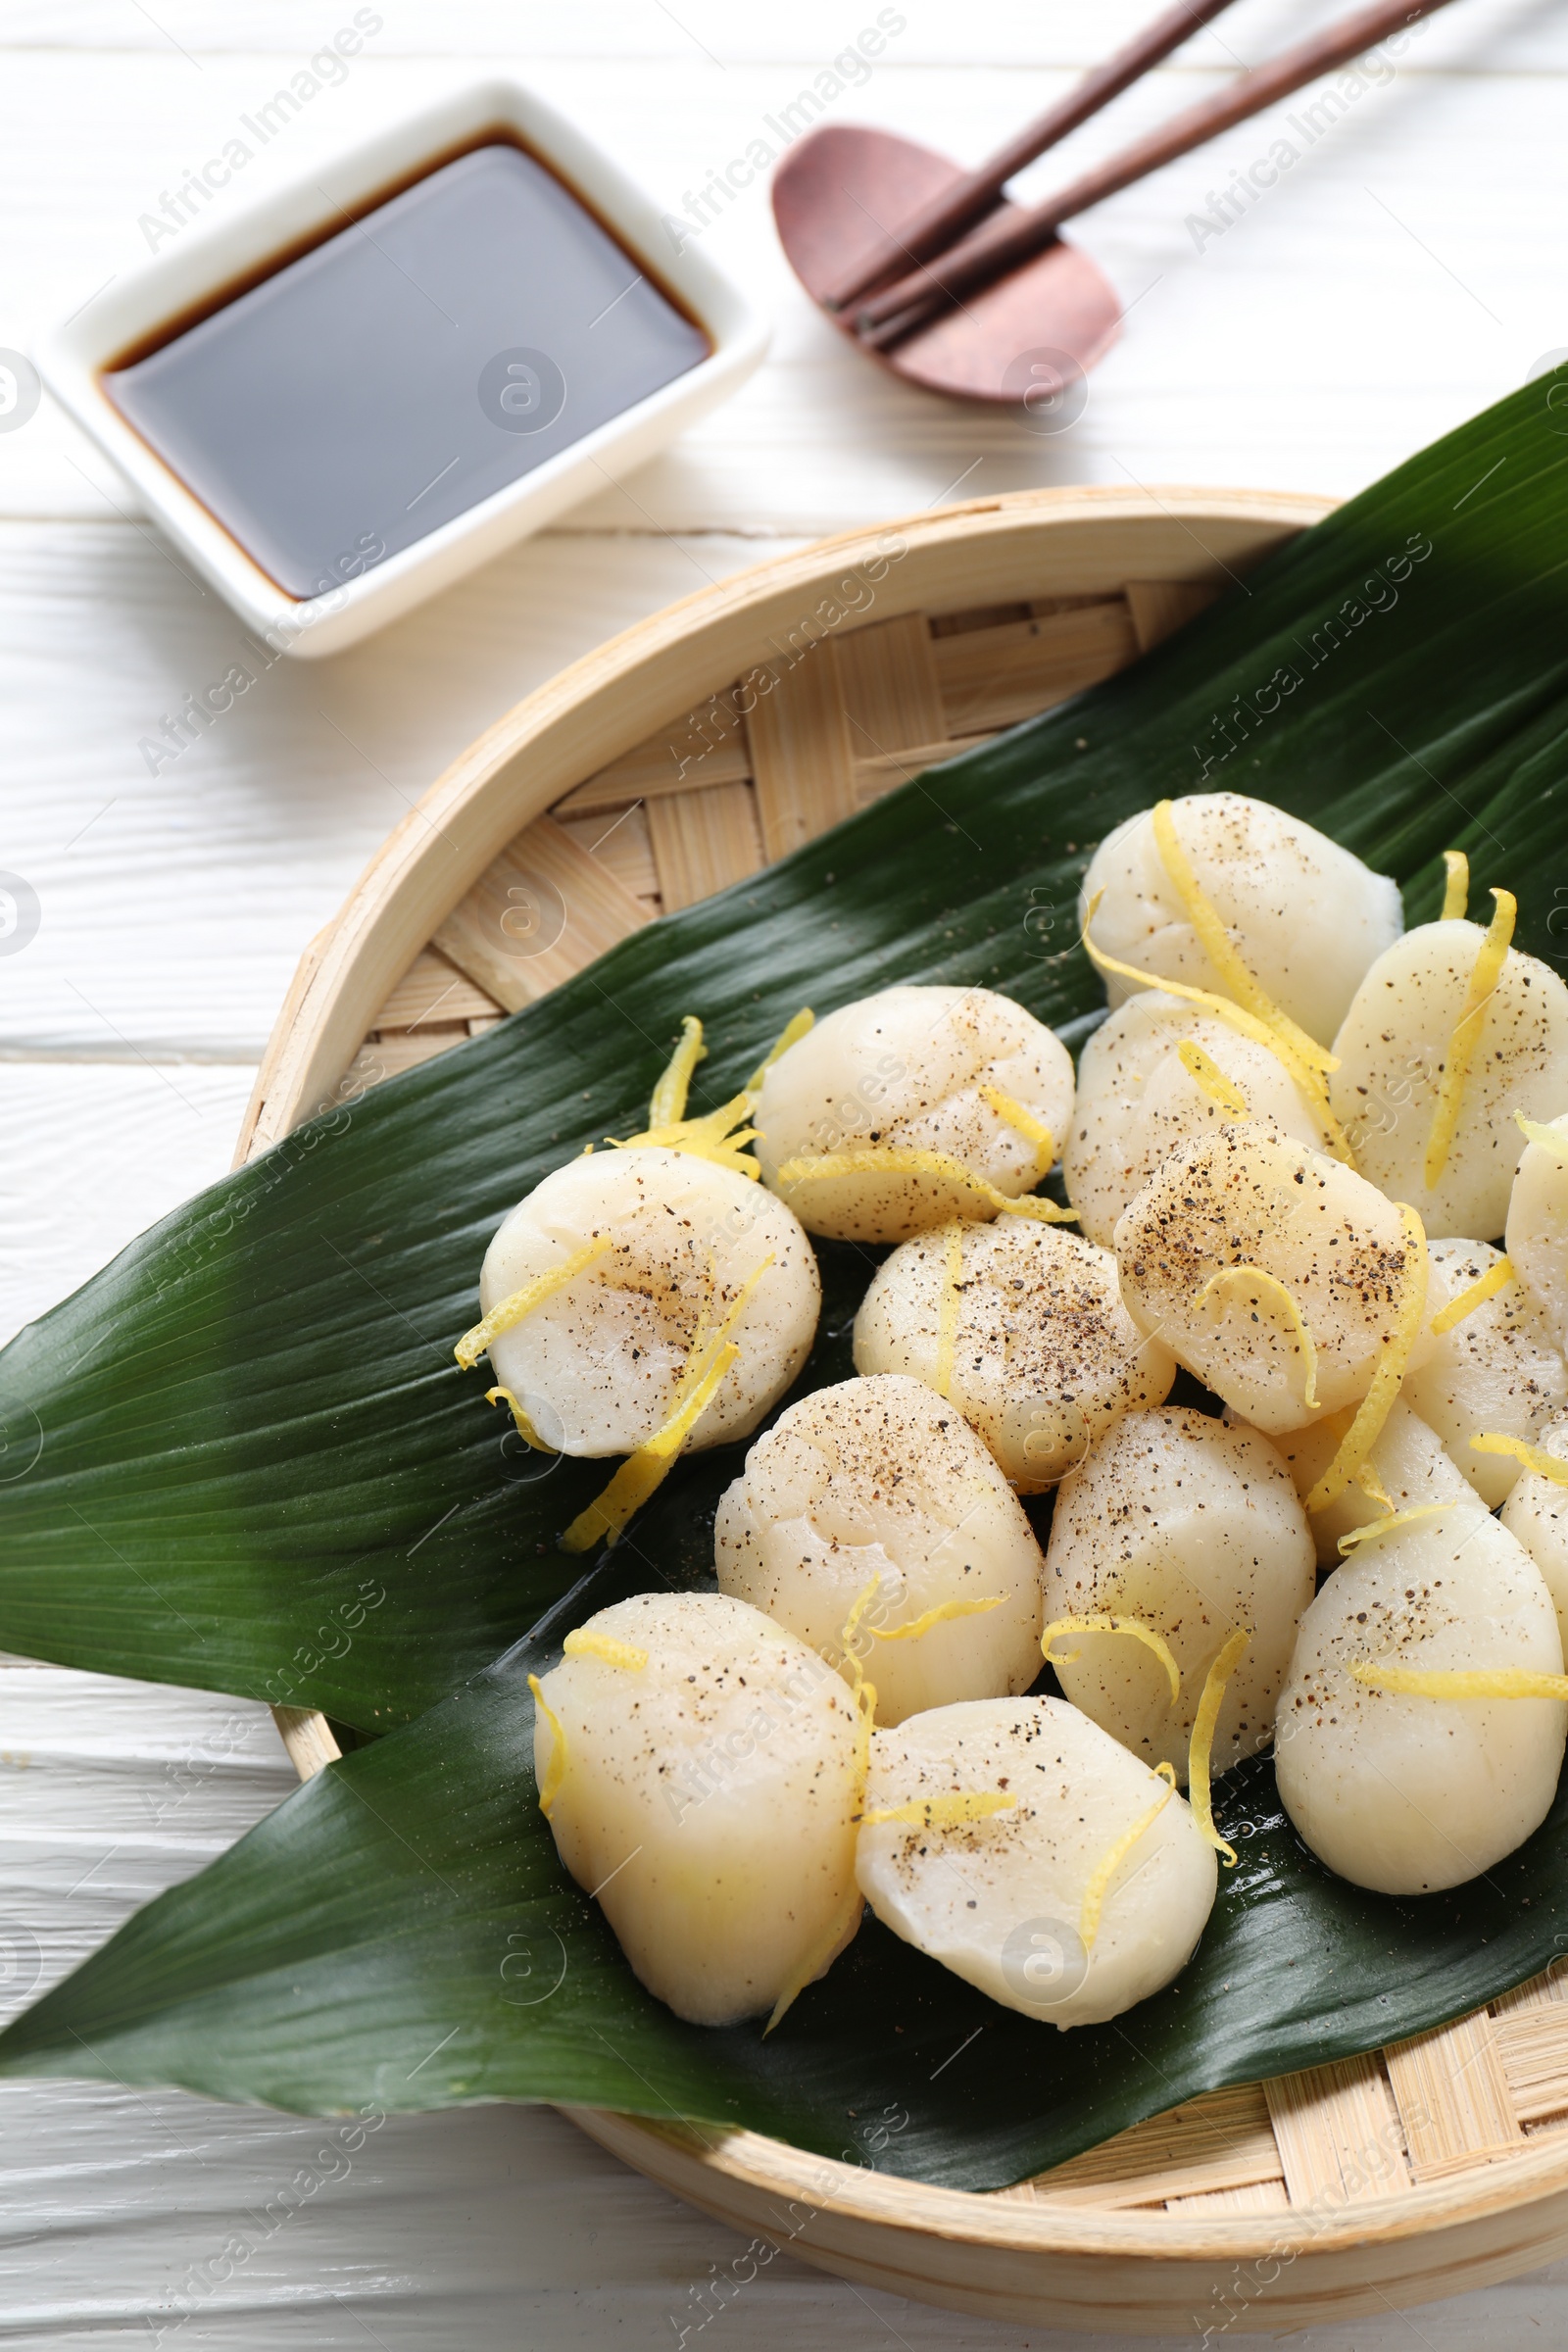 Photo of Raw scallops with milled pepper, lemon zest and soy sauce on white wooden table, flat lay